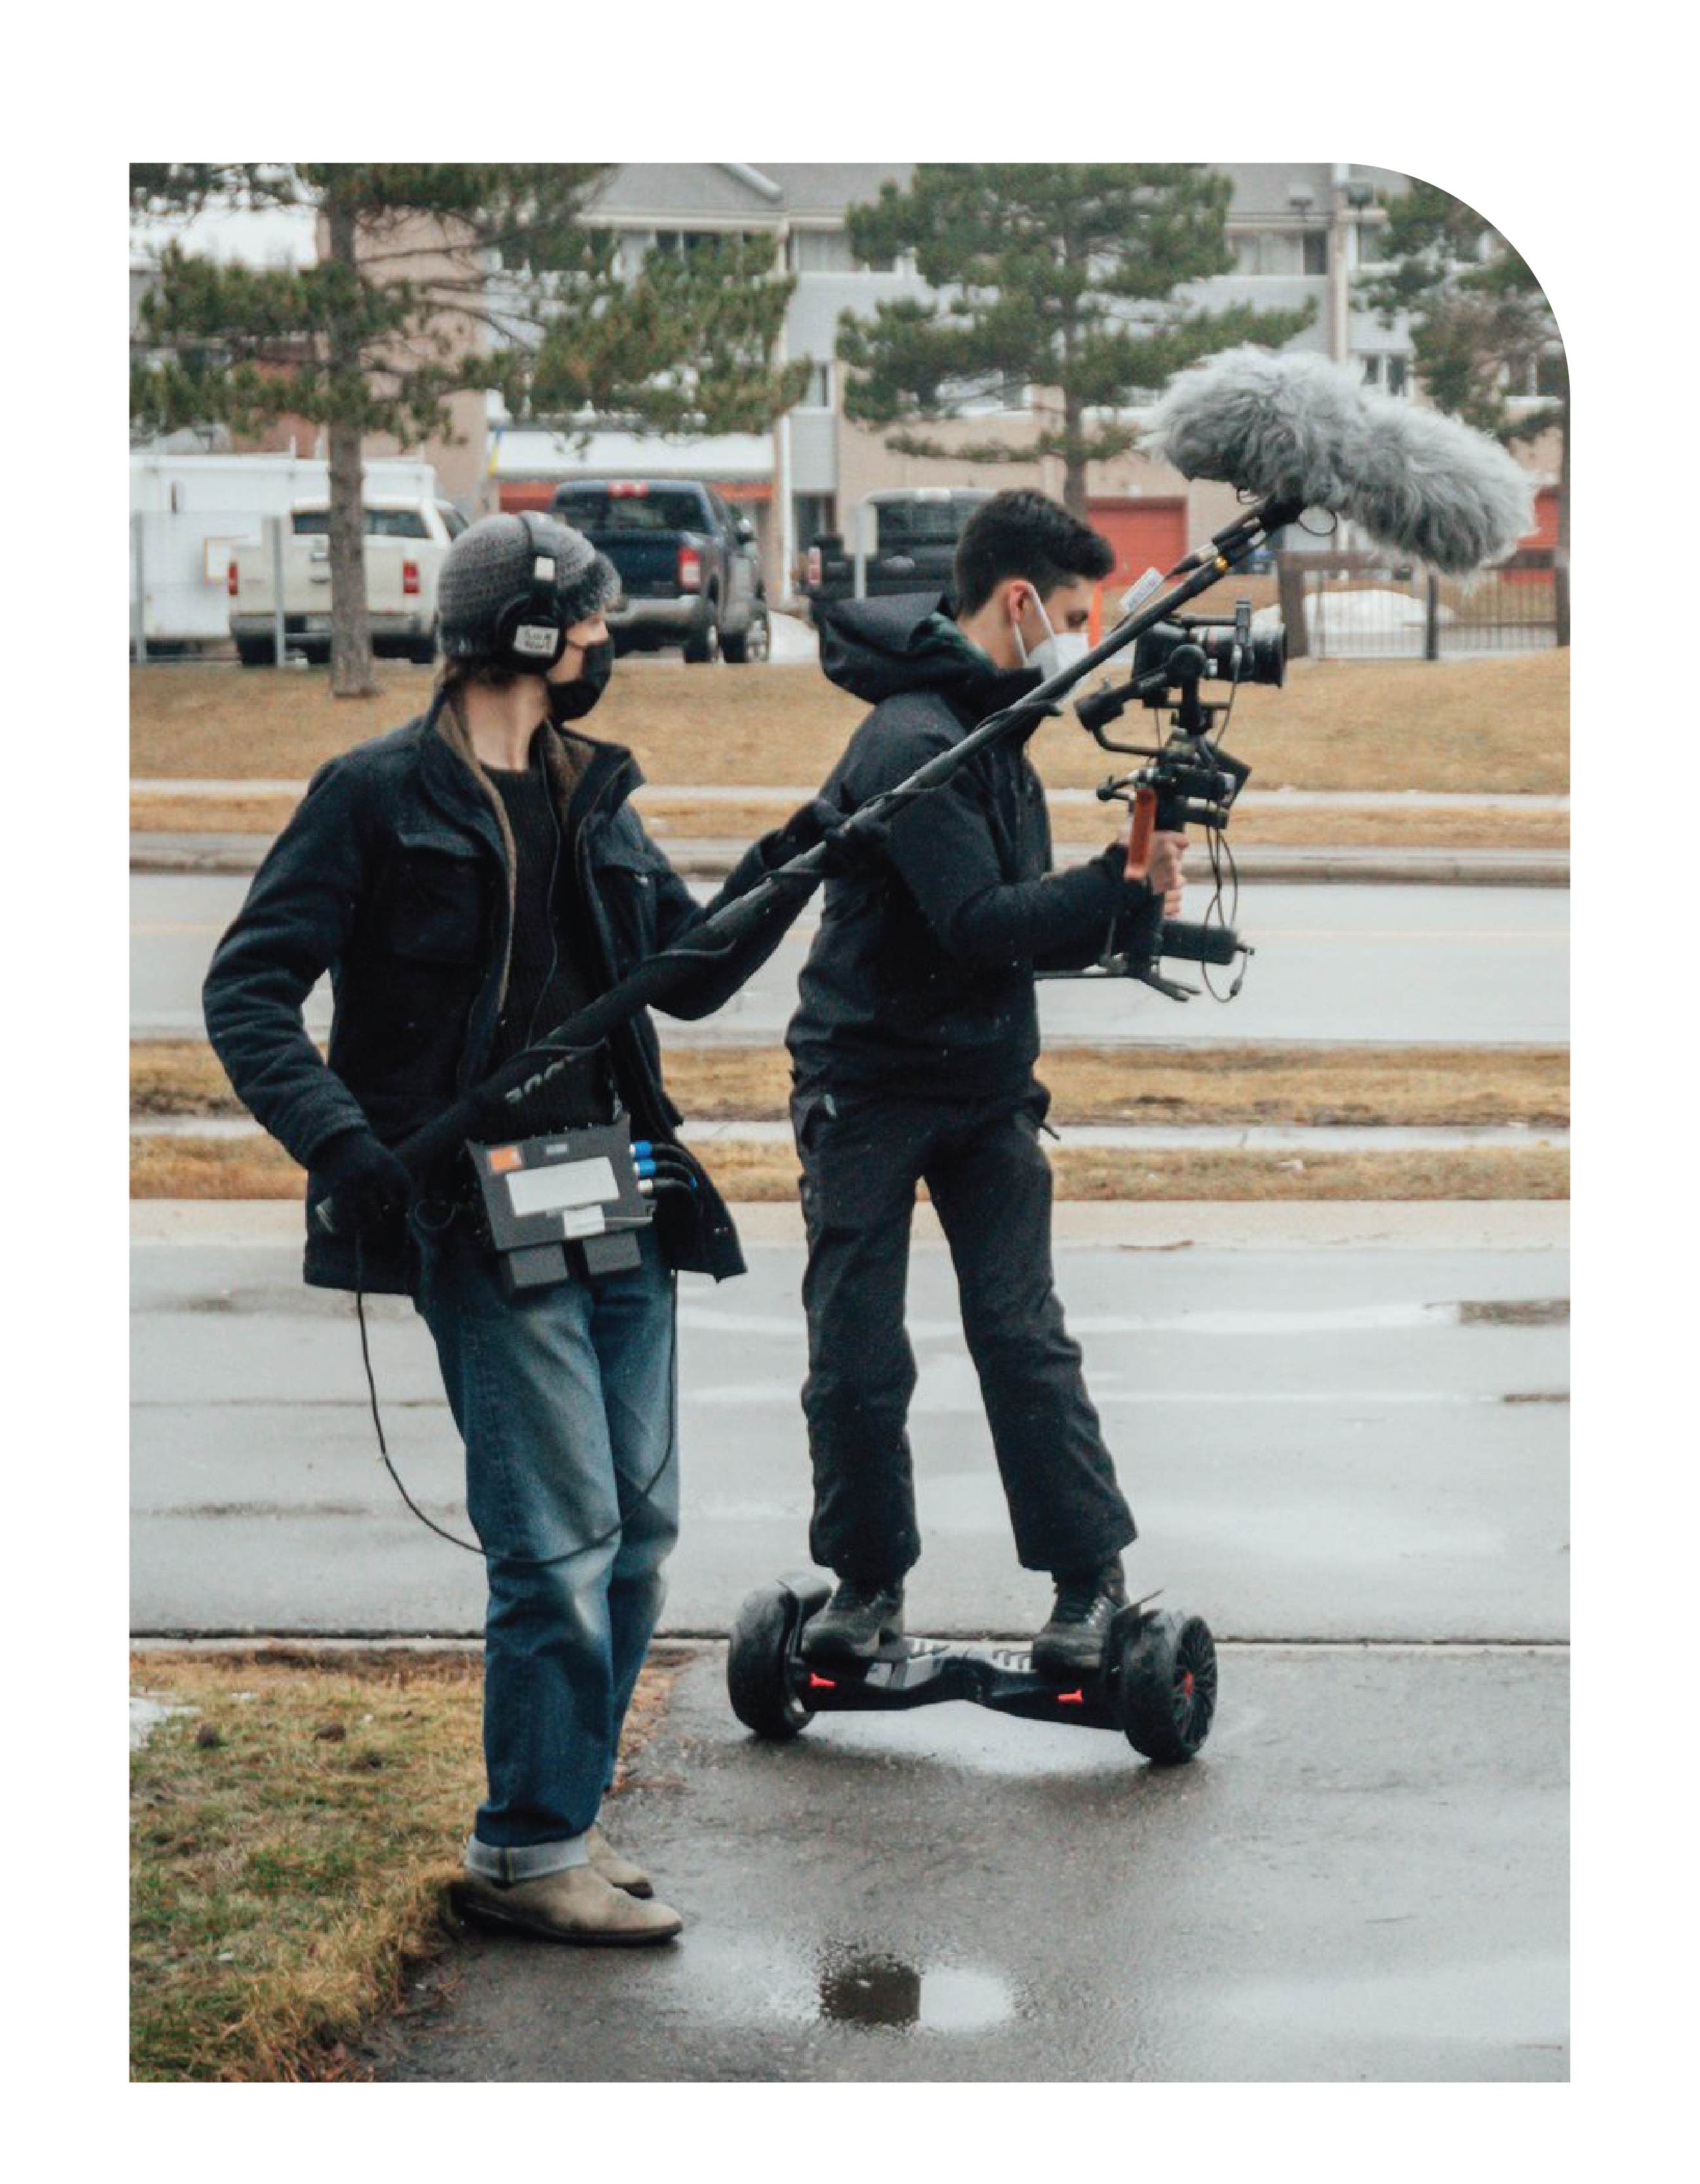 Two students on film shoot: one holding boom mic, the other shooting with camera